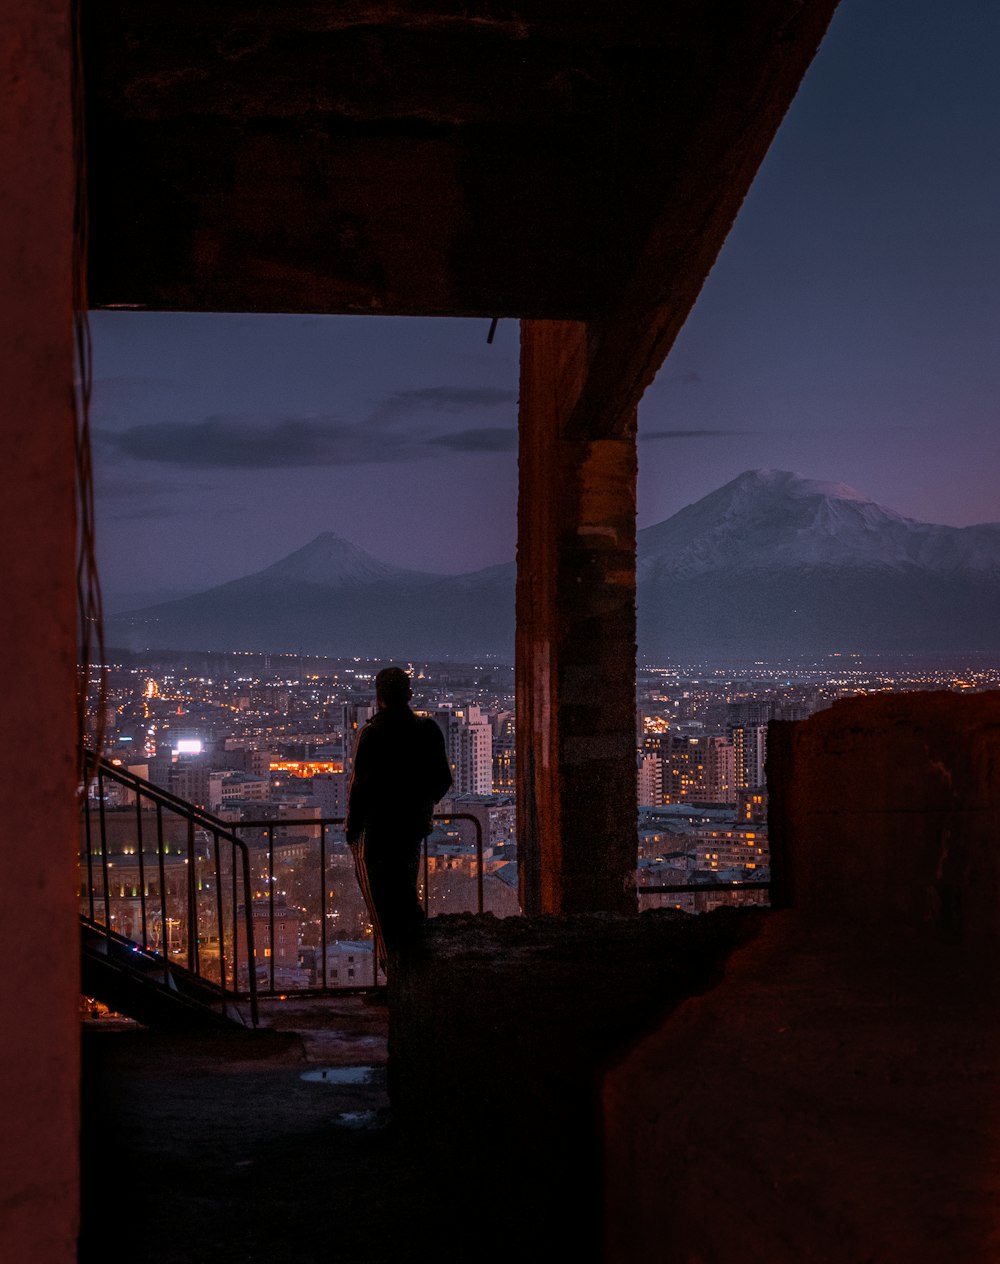 a person standing on a balcony overlooking a city at night